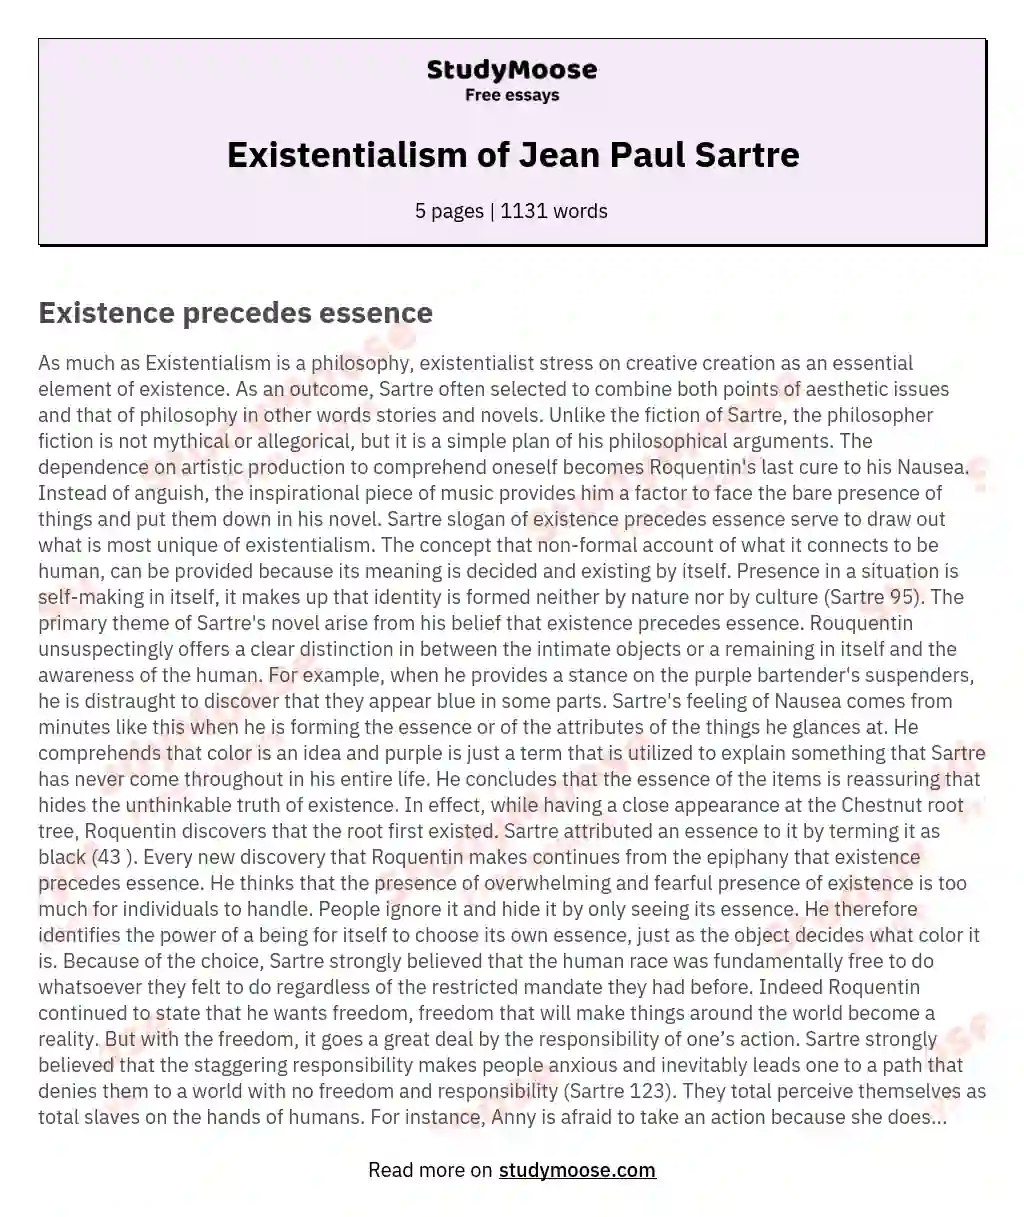 Existentialism of Jean Paul Sartre